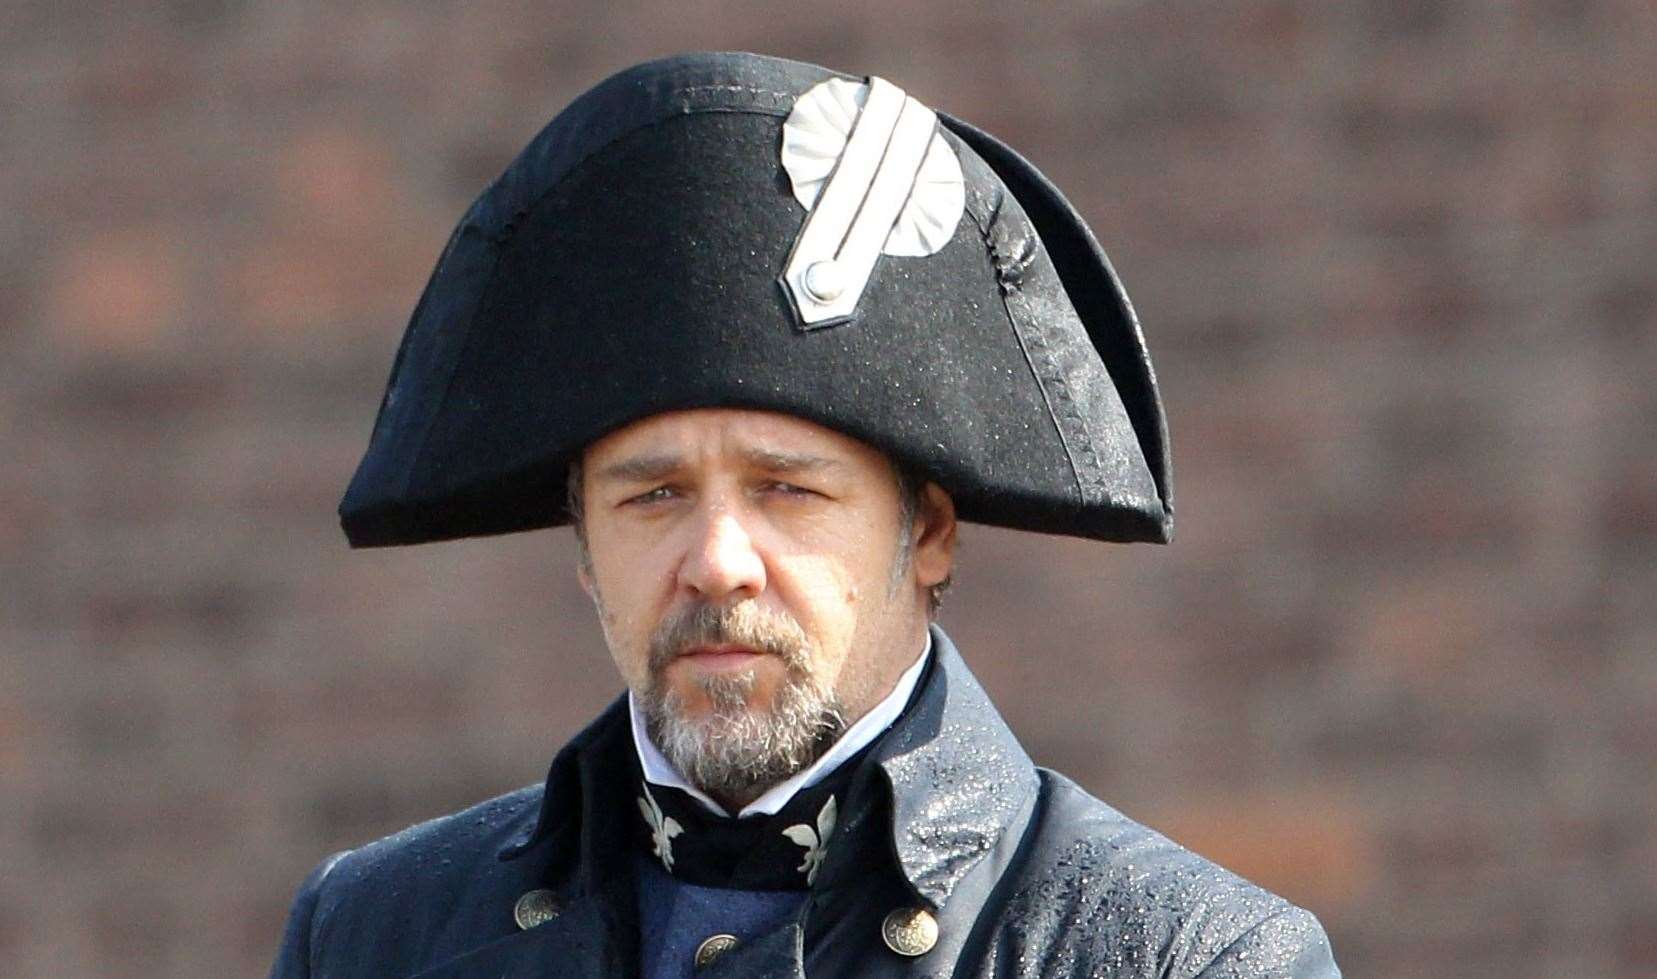 Russell Crowe was taking a break from filming at Chatham Dockyard